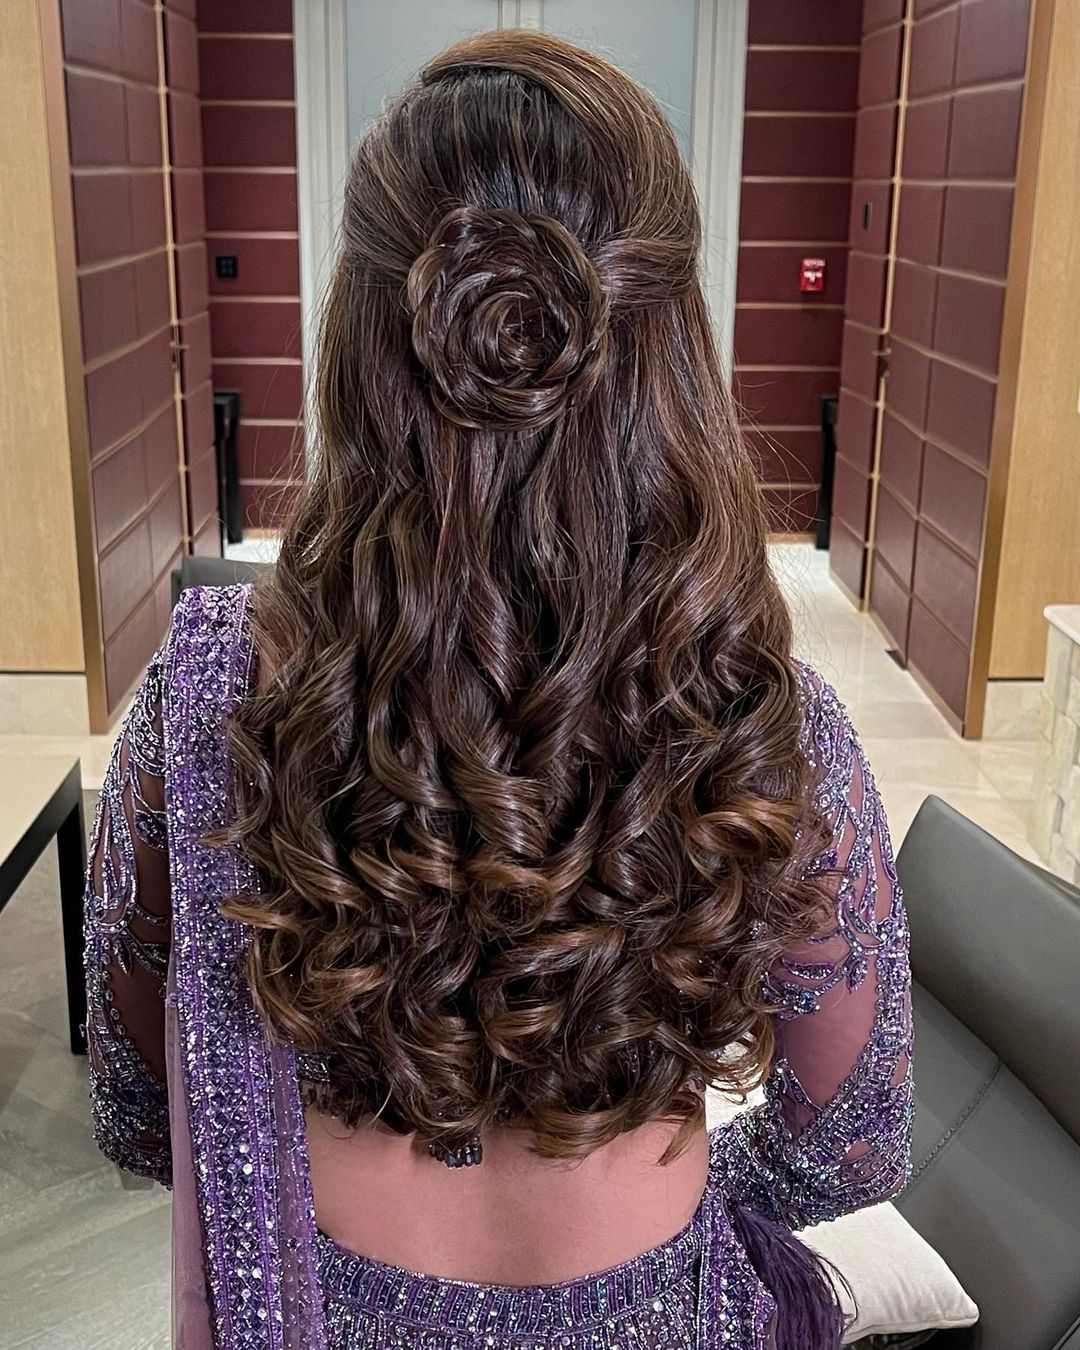 Shehnaaz Gill Inspired Hairstyles For Bridesmaids